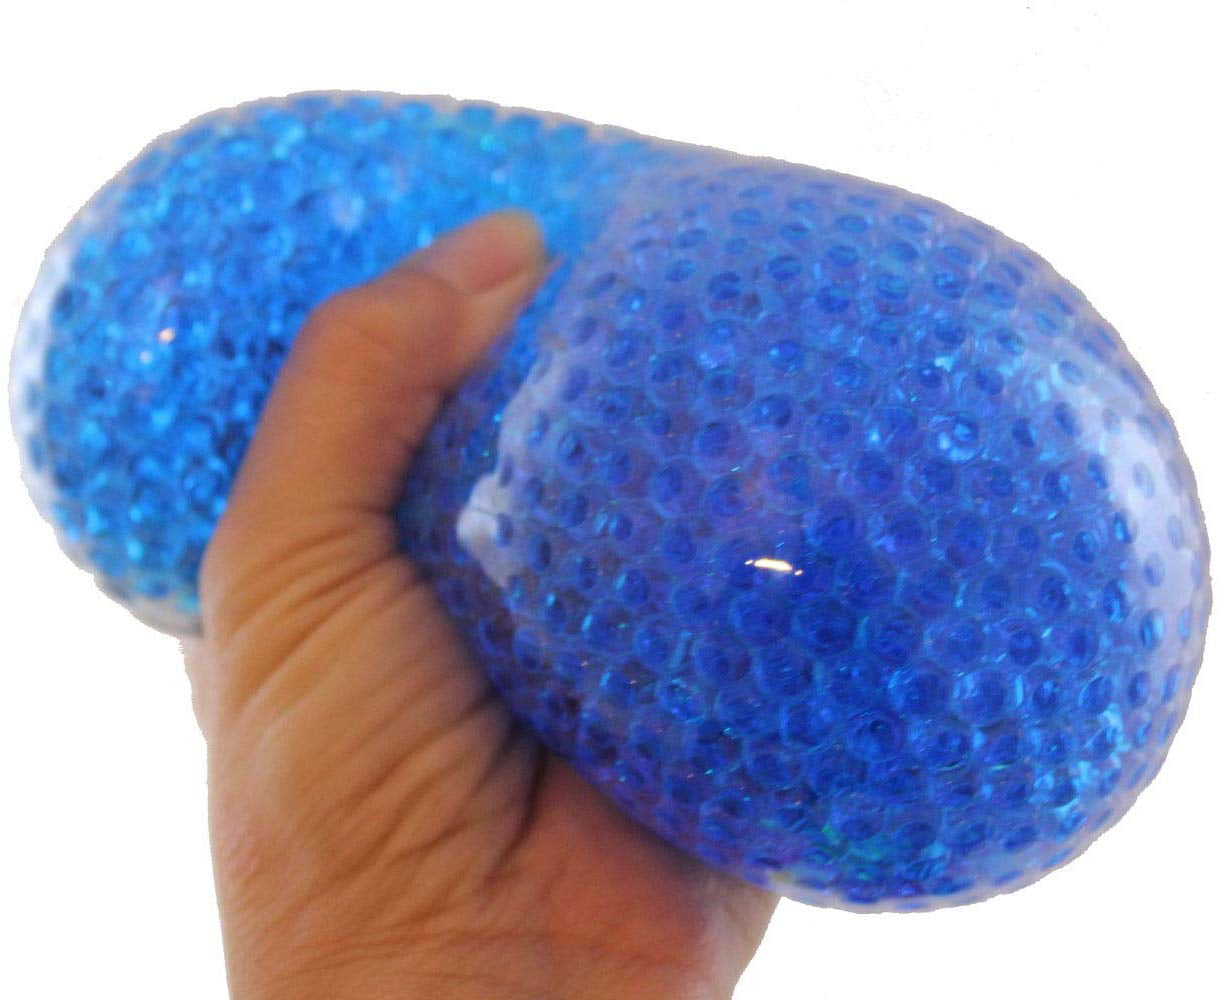 Squishy Squeezy Crunchy NeeDoh Schylling Snow Ball Stretchy Stress Balls 